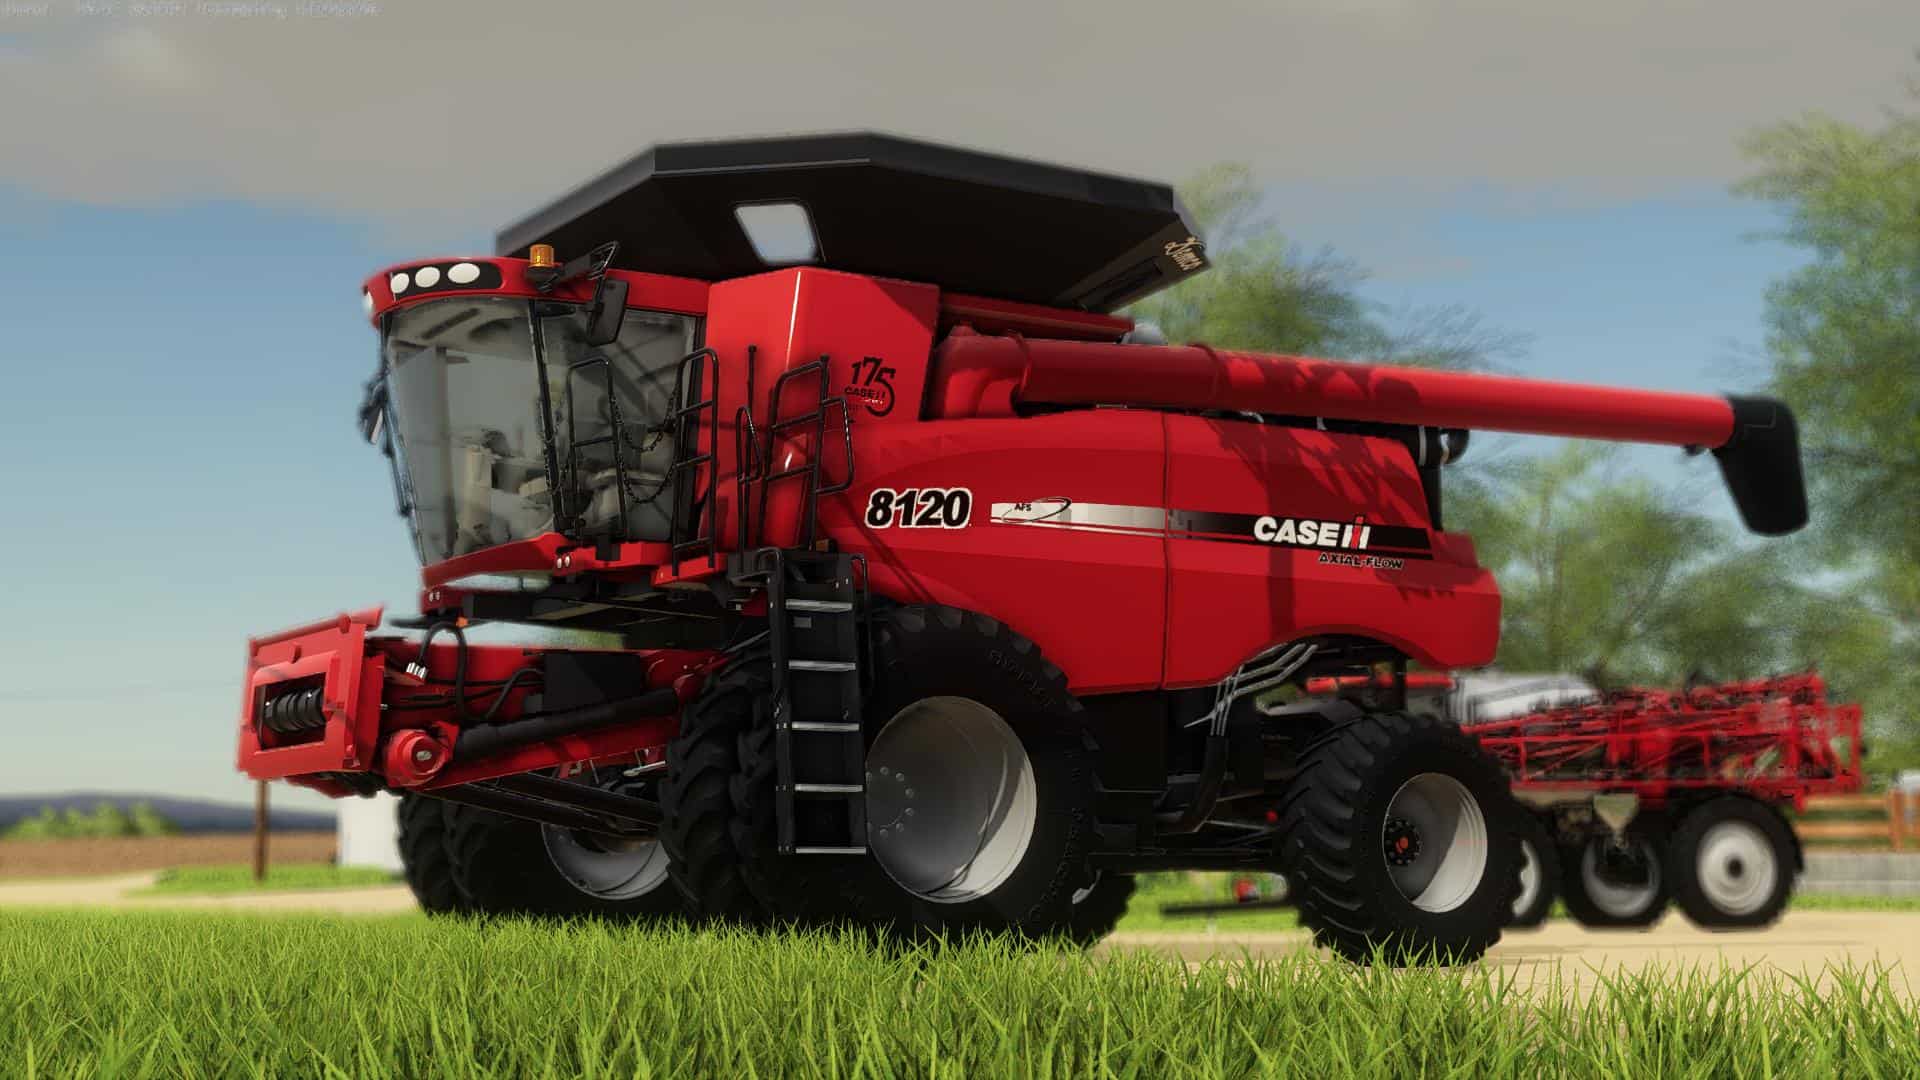 Fs19 Case Ih 8120 9230 Axial Flow Series V10 Fs 19 Combines Mod Download